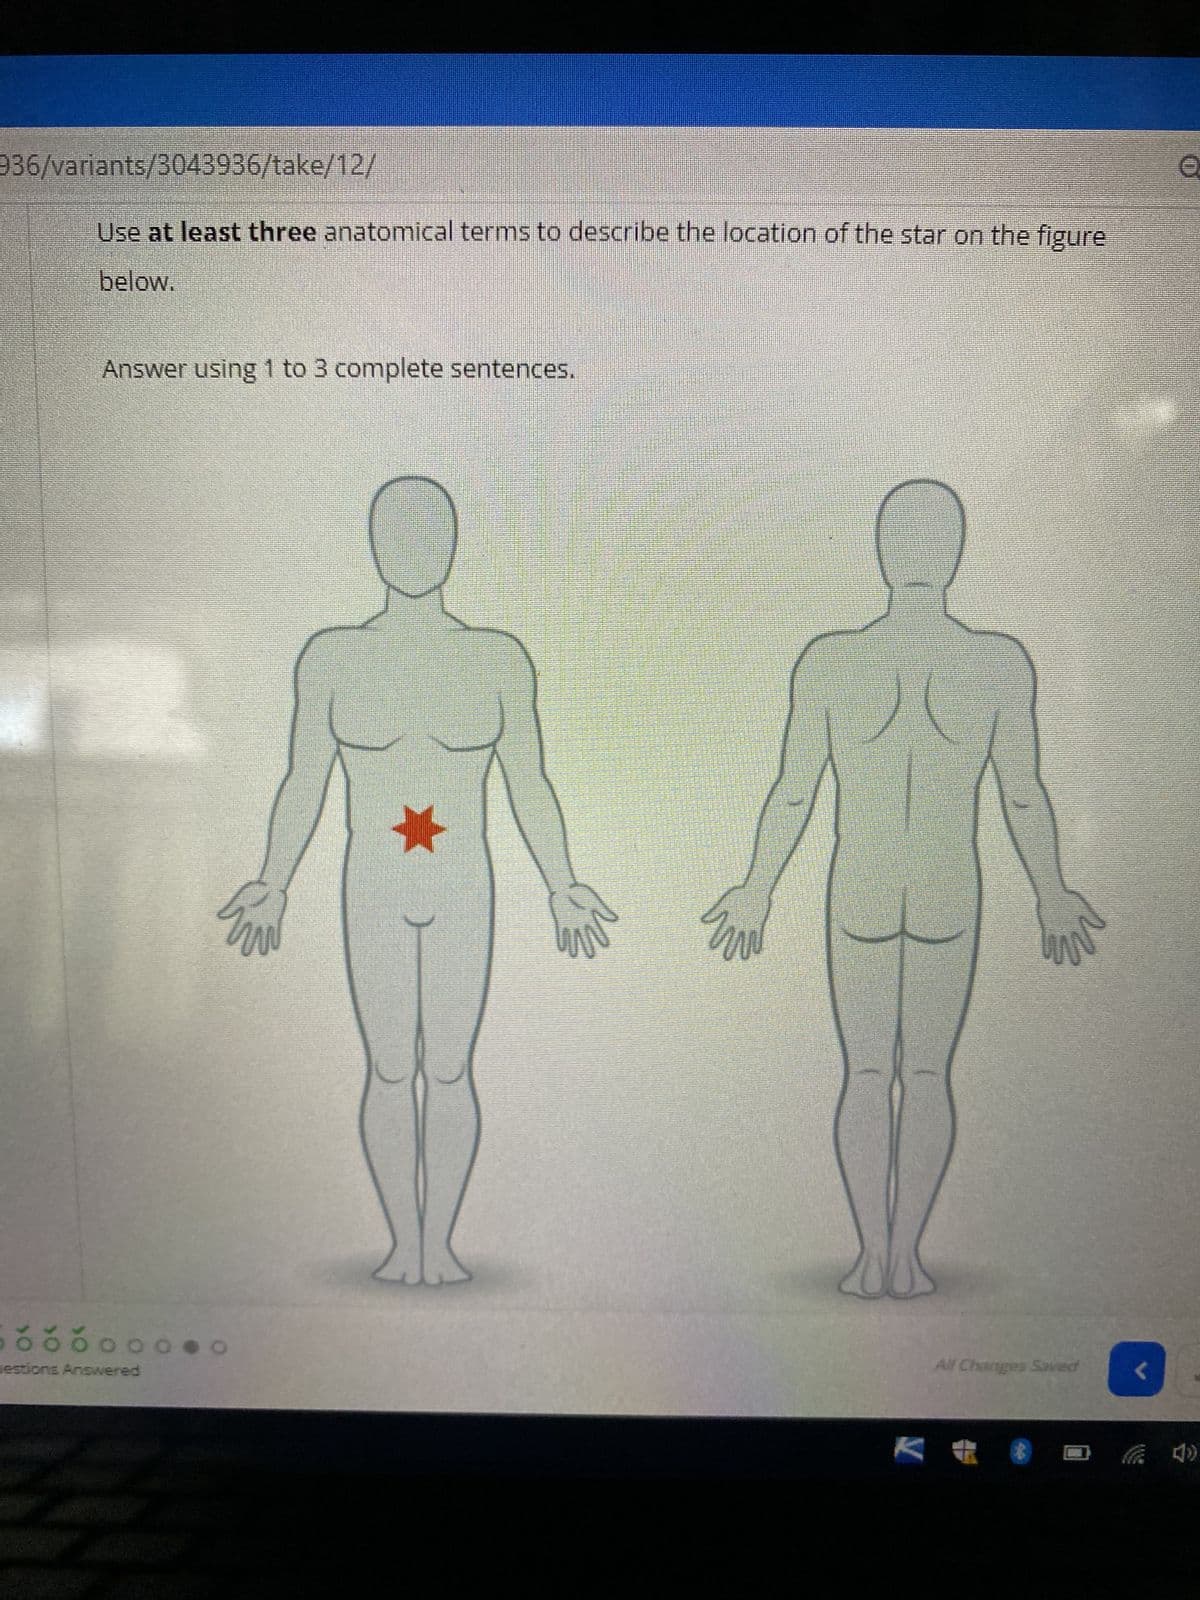 936/variants/3043936/take/12/
Use at least three anatomical terms to describe the location of the star on the figure
below.
Answer using 1 to 3 complete sentences.
ooooo
estions Answered
O
t
UN
All Changes Saved
<
Q